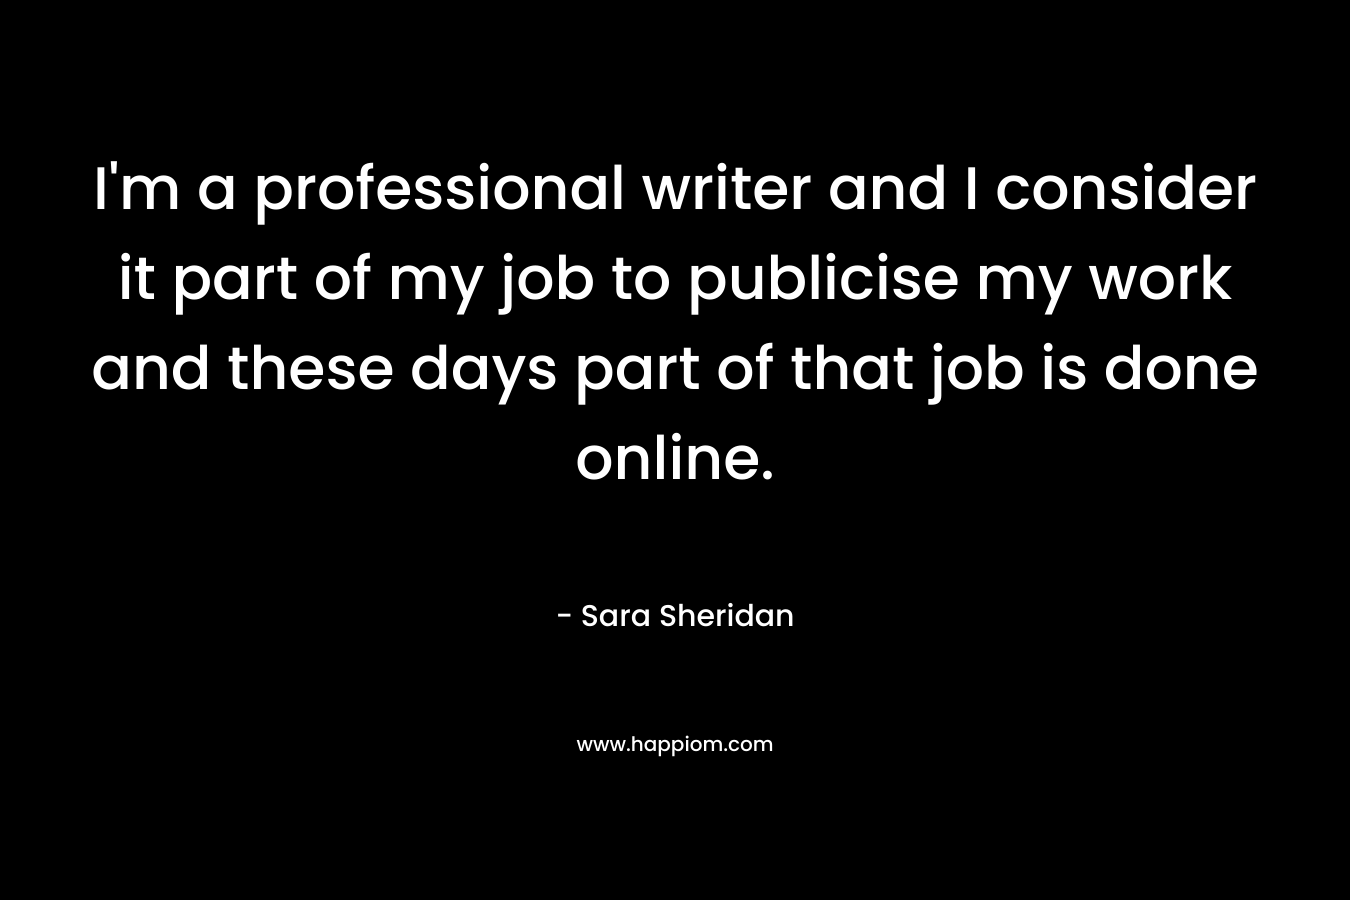 I'm a professional writer and I consider it part of my job to publicise my work and these days part of that job is done online.